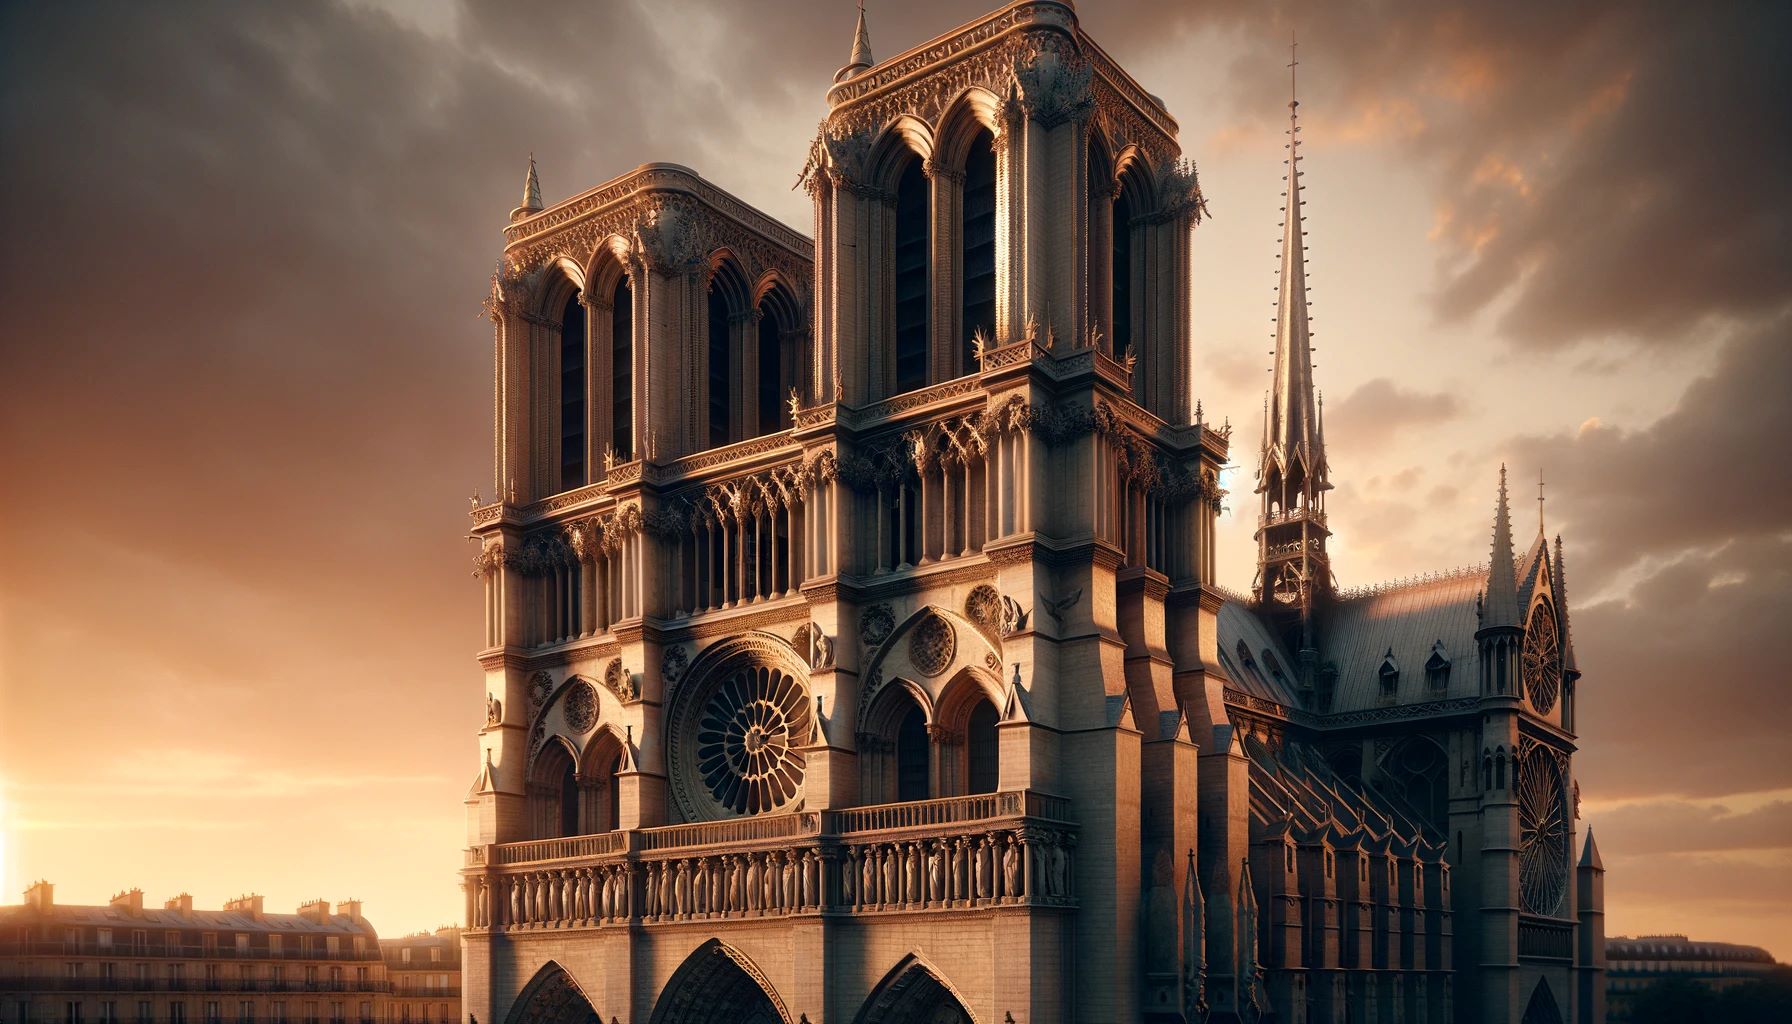 Notre Dame Cathedral In Paris Is An Example Of Which Architectural Style?